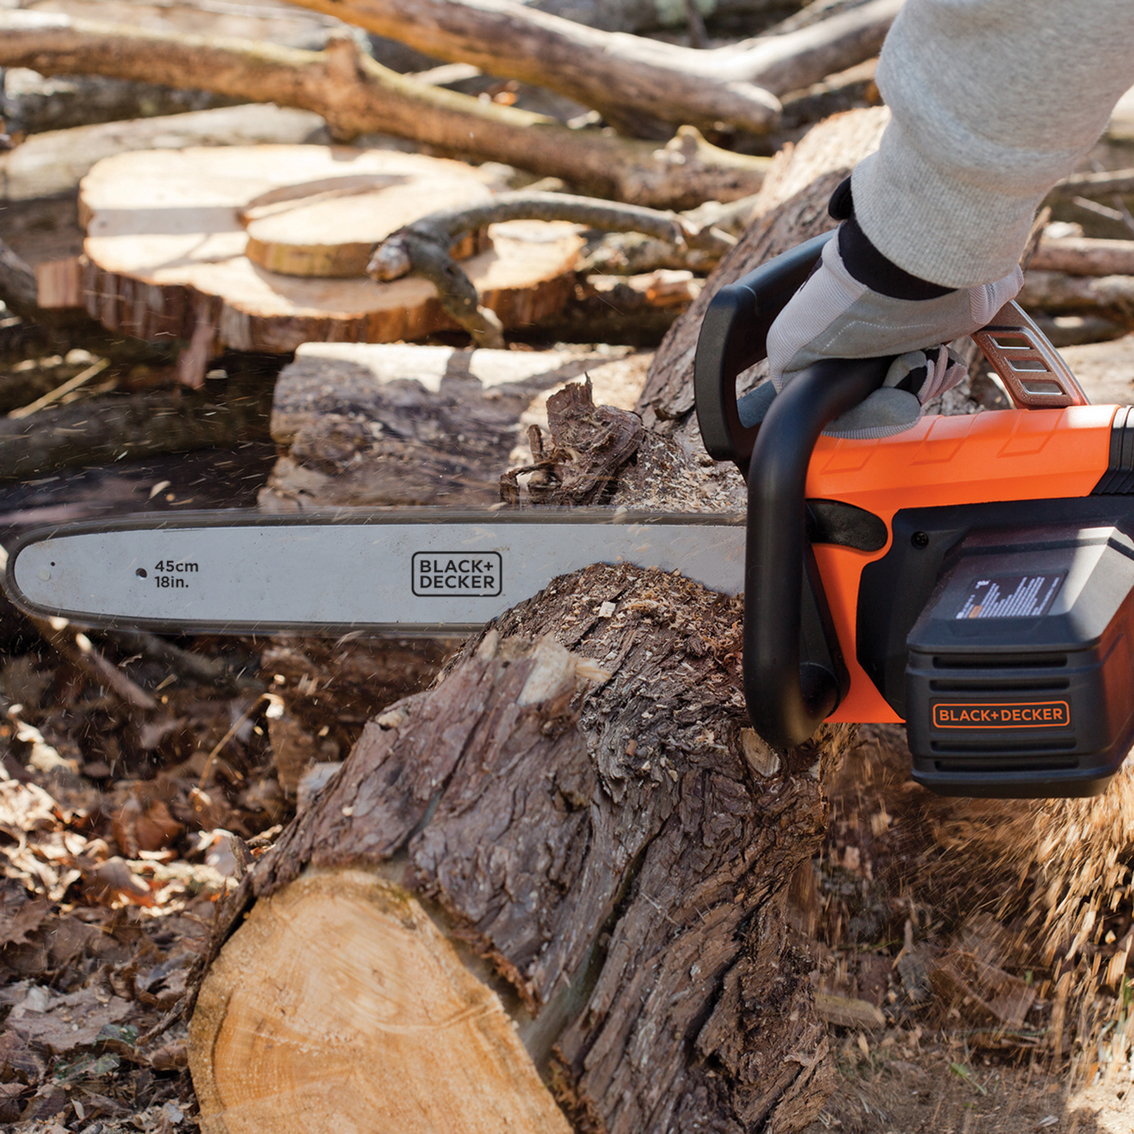 Black + Decker 15 Amp 18 in. Chainsaw - Image 7 of 7